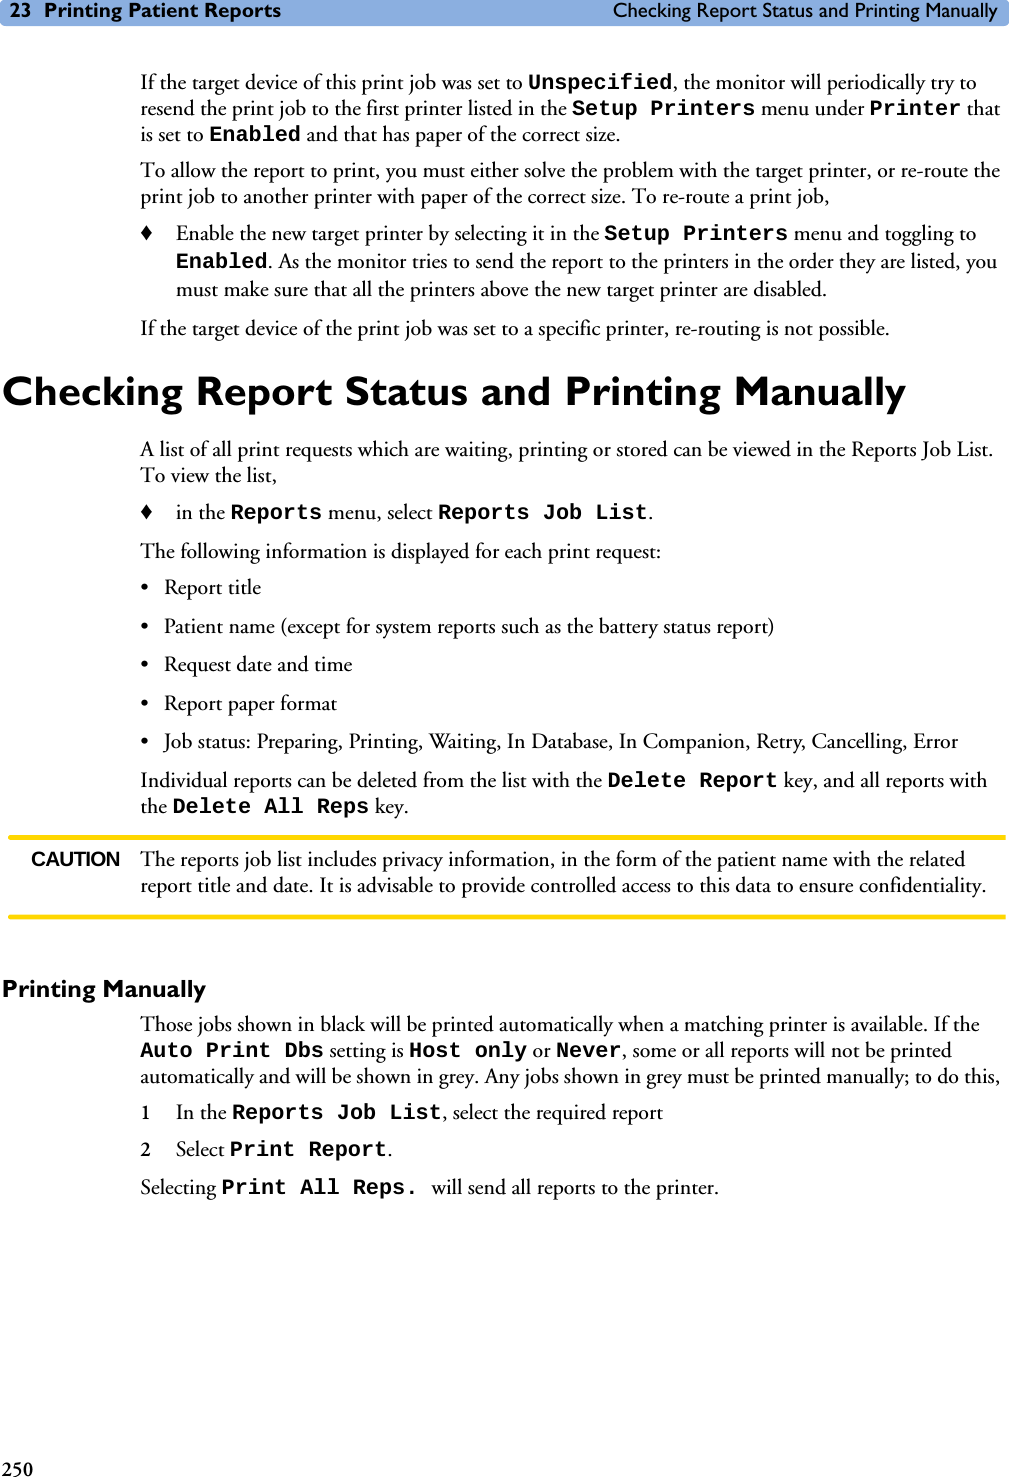 23 Printing Patient Reports Checking Report Status and Printing Manually250If the target device of this print job was set to Unspecified, the monitor will periodically try to resend the print job to the first printer listed in the Setup Printers menu under Printer that is set to Enabled and that has paper of the correct size. To allow the report to print, you must either solve the problem with the target printer, or re-route the print job to another printer with paper of the correct size. To re-route a print job,♦Enable the new target printer by selecting it in the Setup Printers menu and toggling to Enabled. As the monitor tries to send the report to the printers in the order they are listed, you must make sure that all the printers above the new target printer are disabled.If the target device of the print job was set to a specific printer, re-routing is not possible. Checking Report Status and Printing ManuallyA list of all print requests which are waiting, printing or stored can be viewed in the Reports Job List. To view the list, ♦in the Reports menu, select Reports Job List.The following information is displayed for each print request:• Report title• Patient name (except for system reports such as the battery status report)• Request date and time• Report paper format• Job status: Preparing, Printing, Waiting, In Database, In Companion, Retry, Cancelling, ErrorIndividual reports can be deleted from the list with the Delete Report key, and all reports with the Delete All Reps key. CAUTION The reports job list includes privacy information, in the form of the patient name with the related report title and date. It is advisable to provide controlled access to this data to ensure confidentiality. Printing ManuallyThose jobs shown in black will be printed automatically when a matching printer is available. If the Auto Print Dbs setting is Host only or Never, some or all reports will not be printed automatically and will be shown in grey. Any jobs shown in grey must be printed manually; to do this, 1In the Reports Job List, select the required report2Select Print Report.Selecting Print All Reps. will send all reports to the printer. 